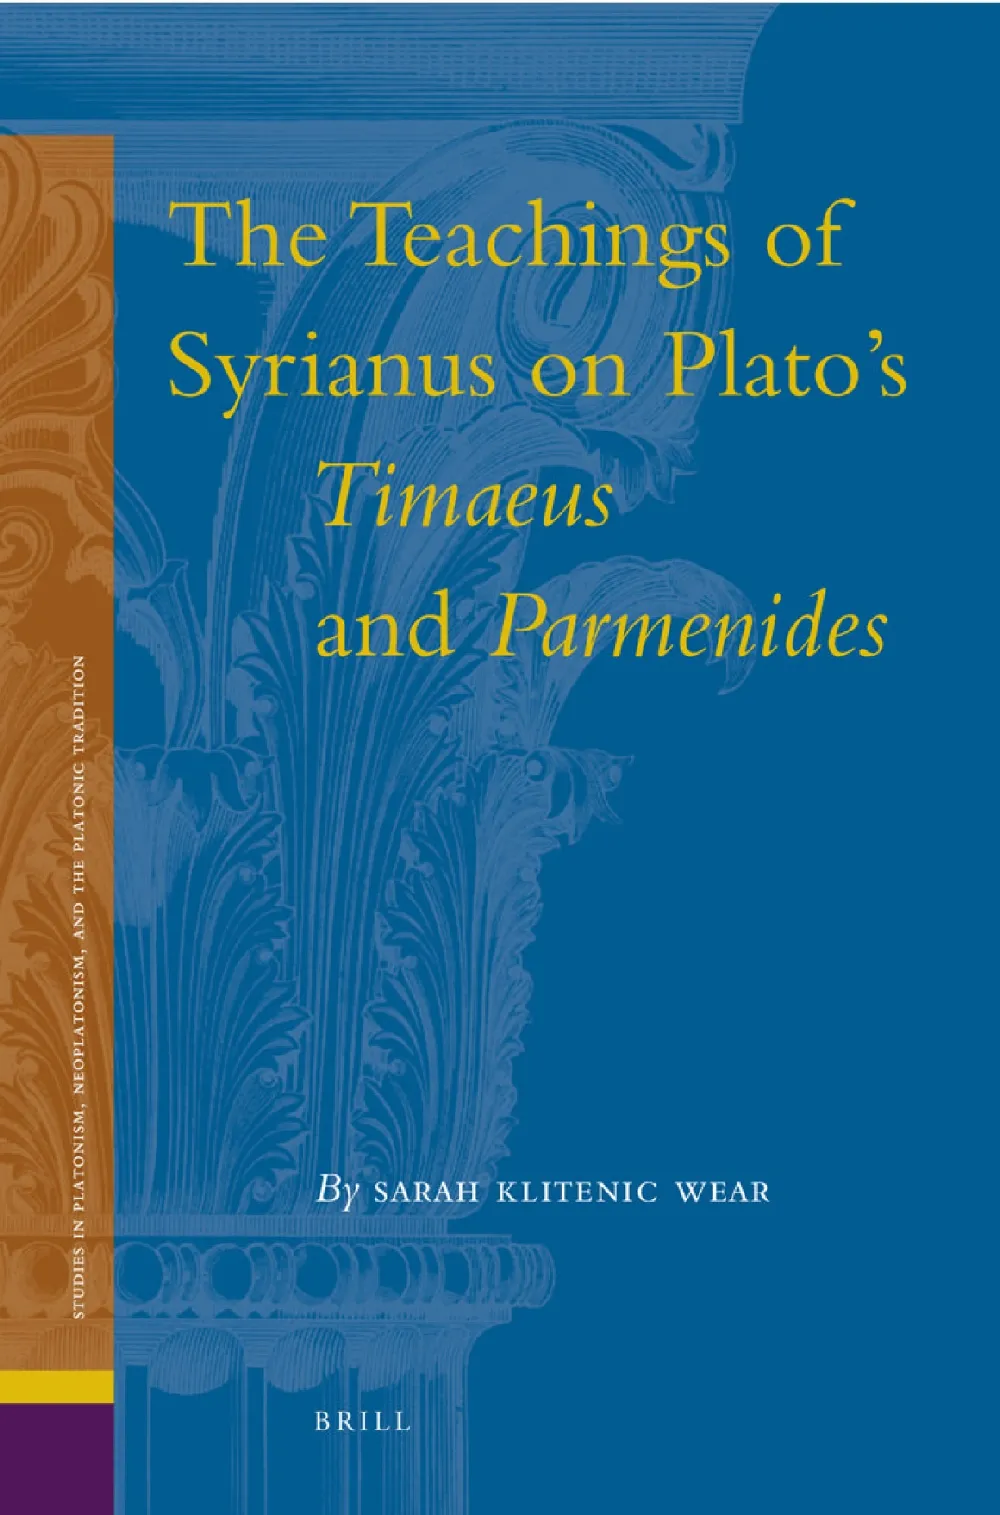 The Teachings of Syrianus on Plato's Timaeus and Parmenides